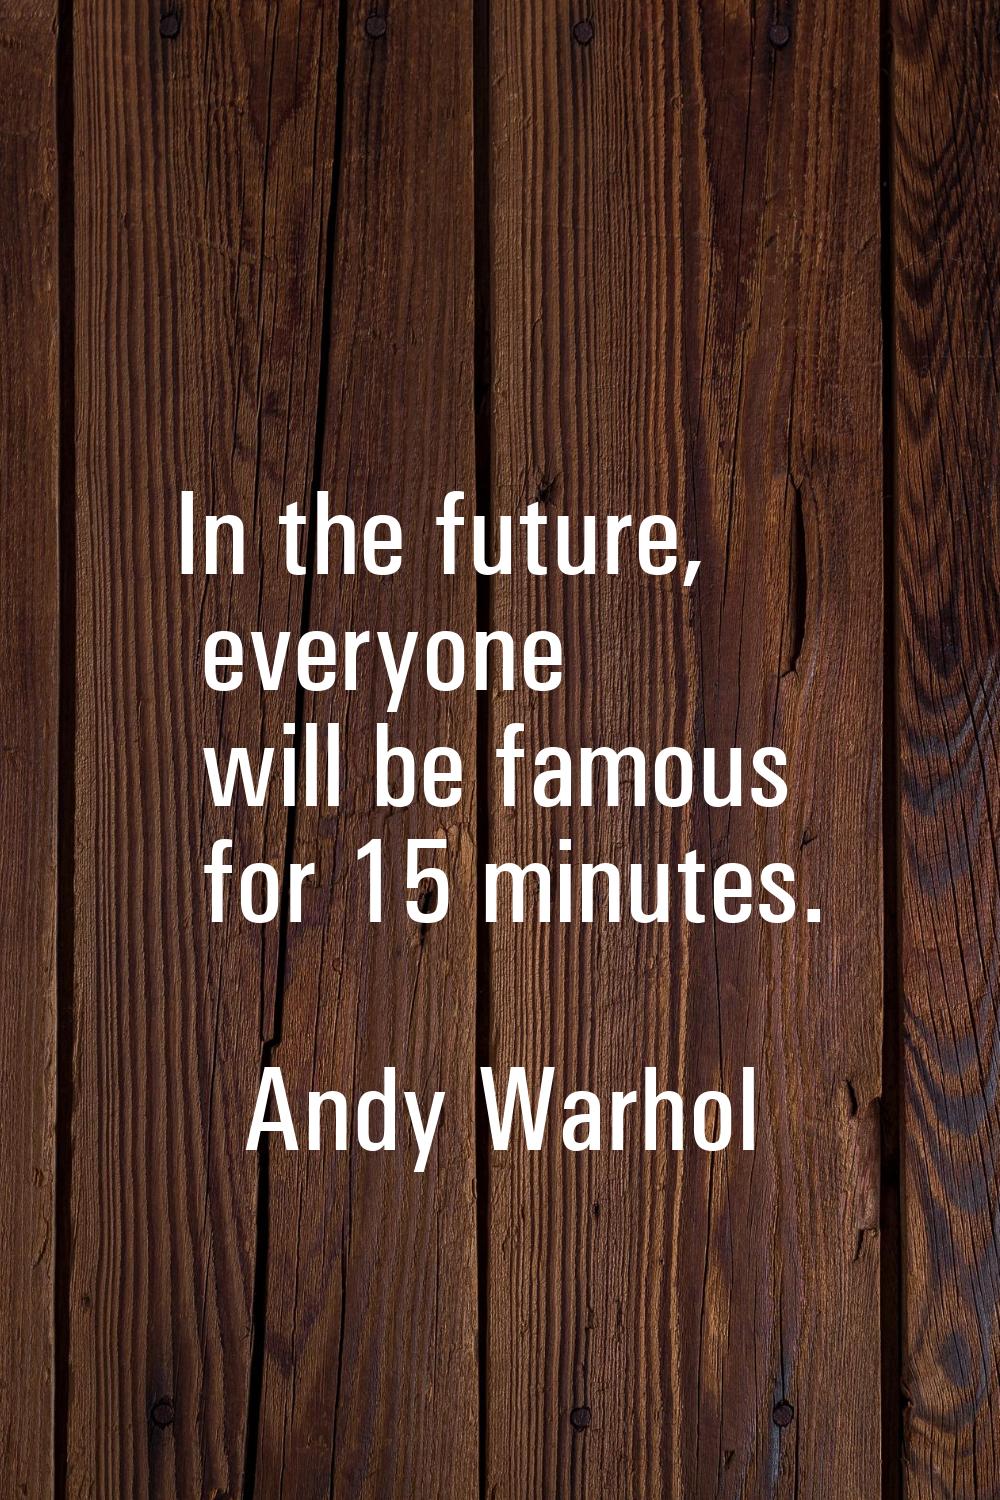 In the future, everyone will be famous for 15 minutes.